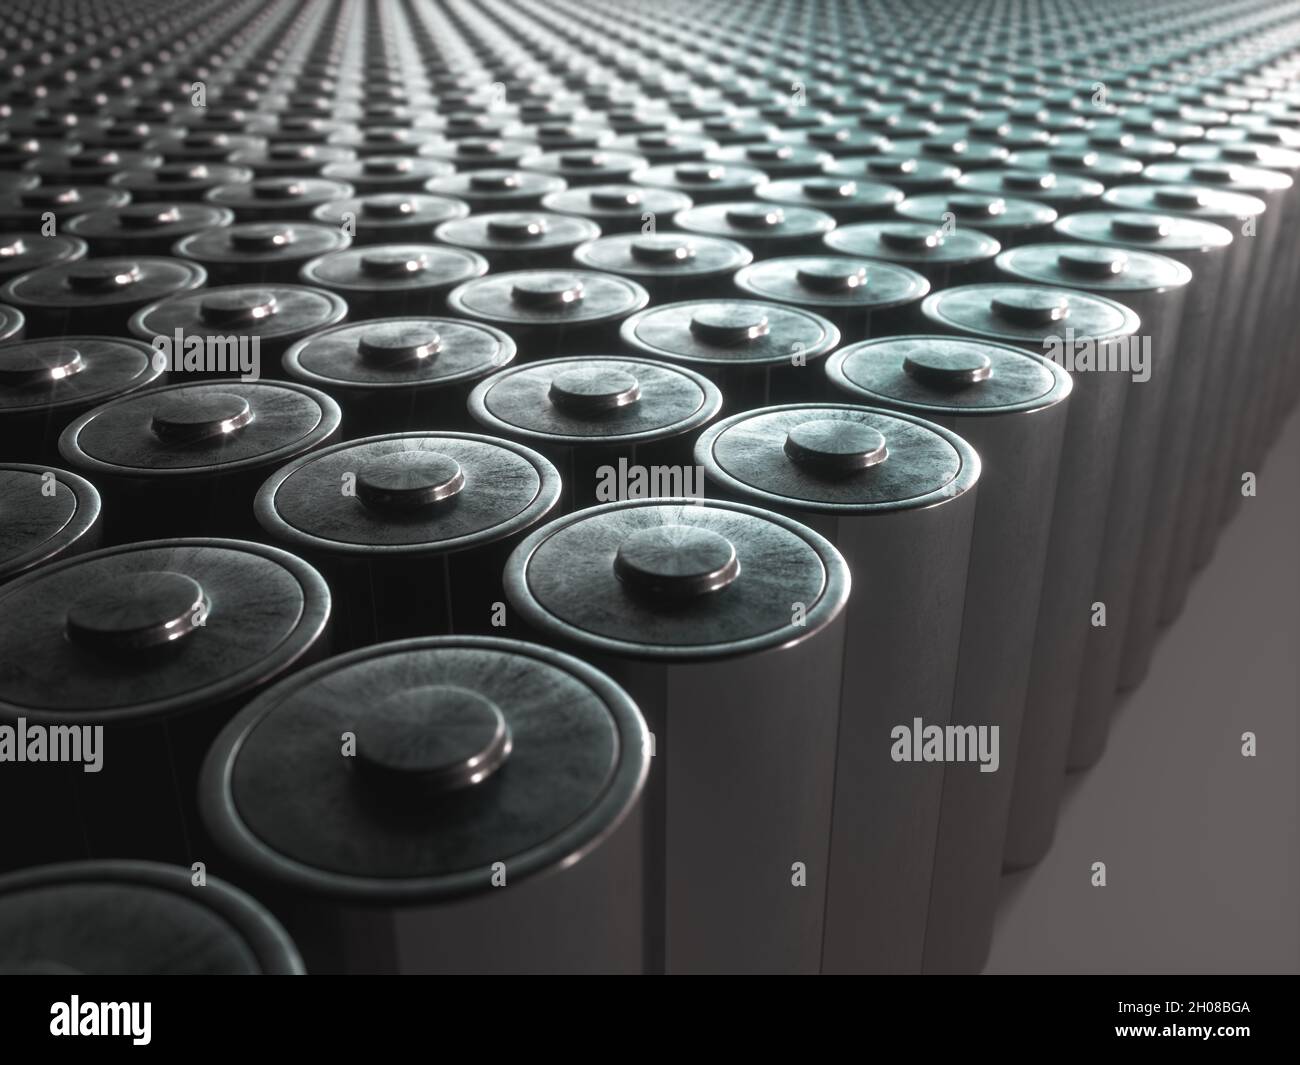 3D illustration, concept image of battery recycling, renewable energy. Stock Photo